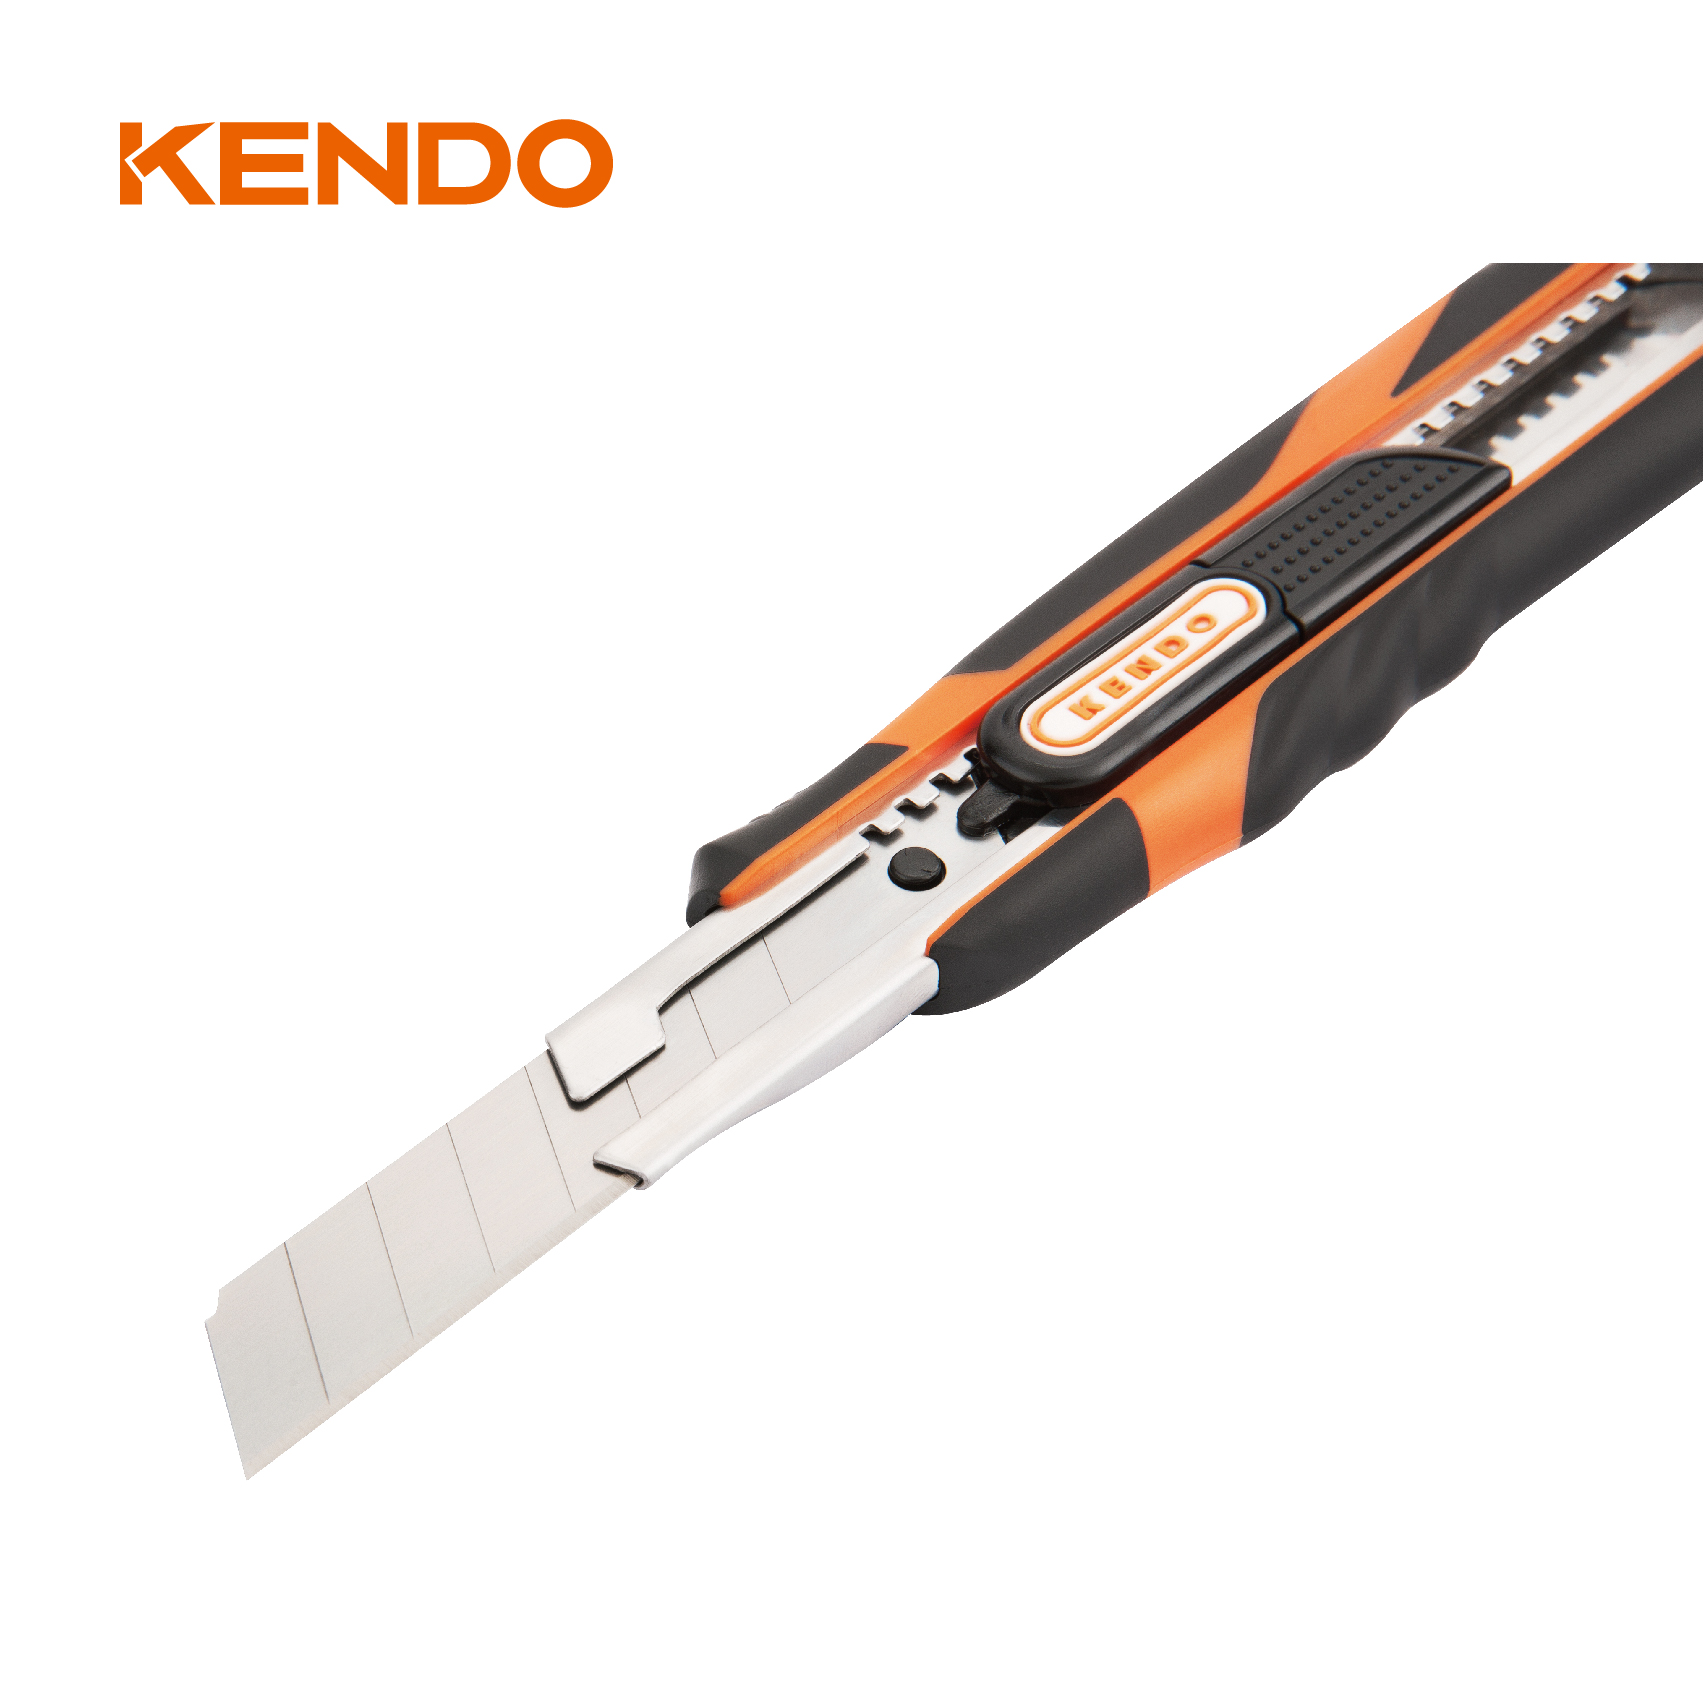 Super Safety Auto Retracting Snap-Off Knife 18mm Zinc Alloy Body With Non-Slip Grip